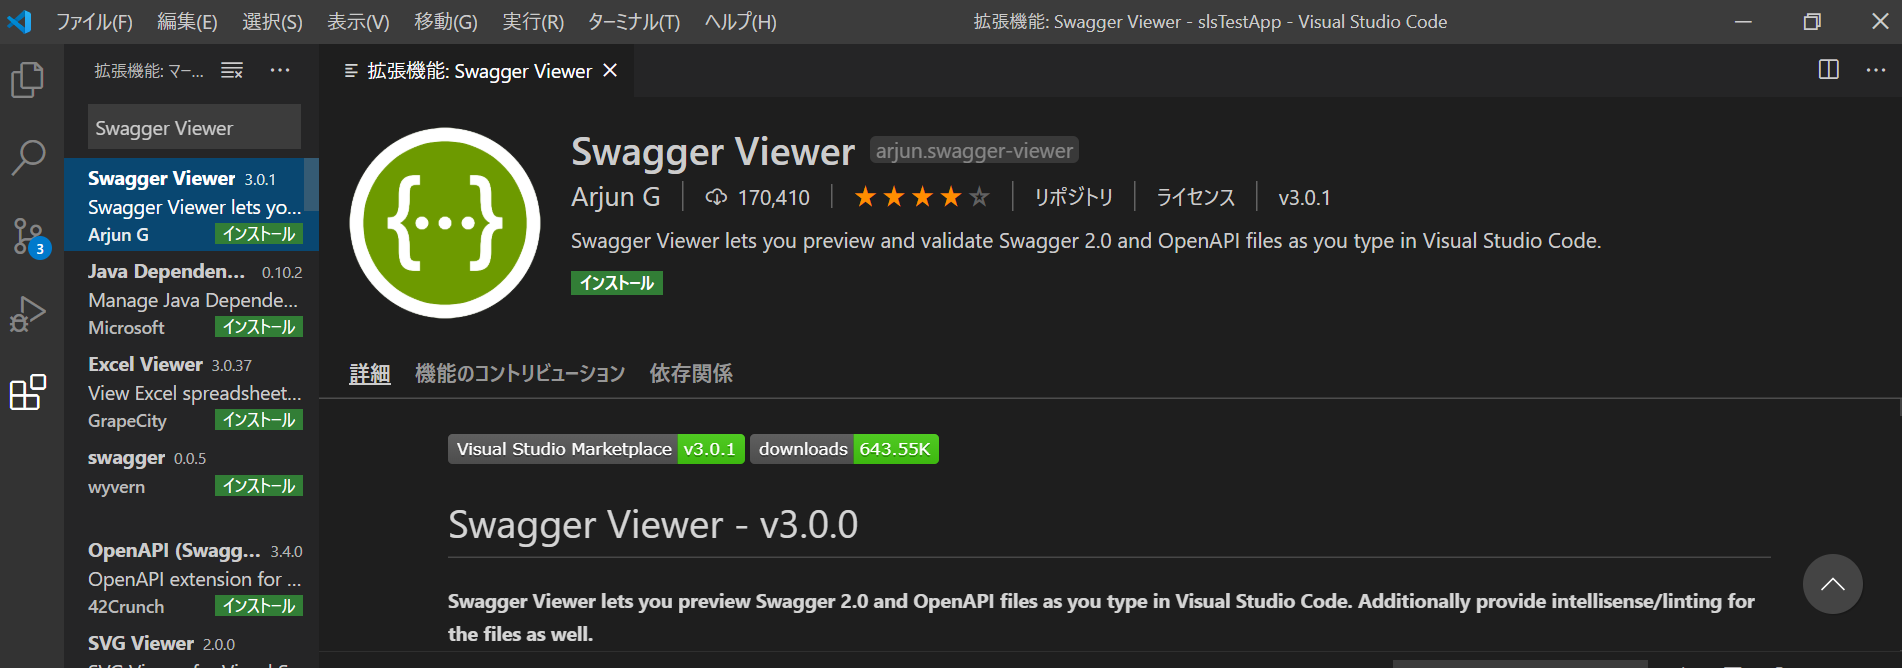 Swagger_Viewer.PNG